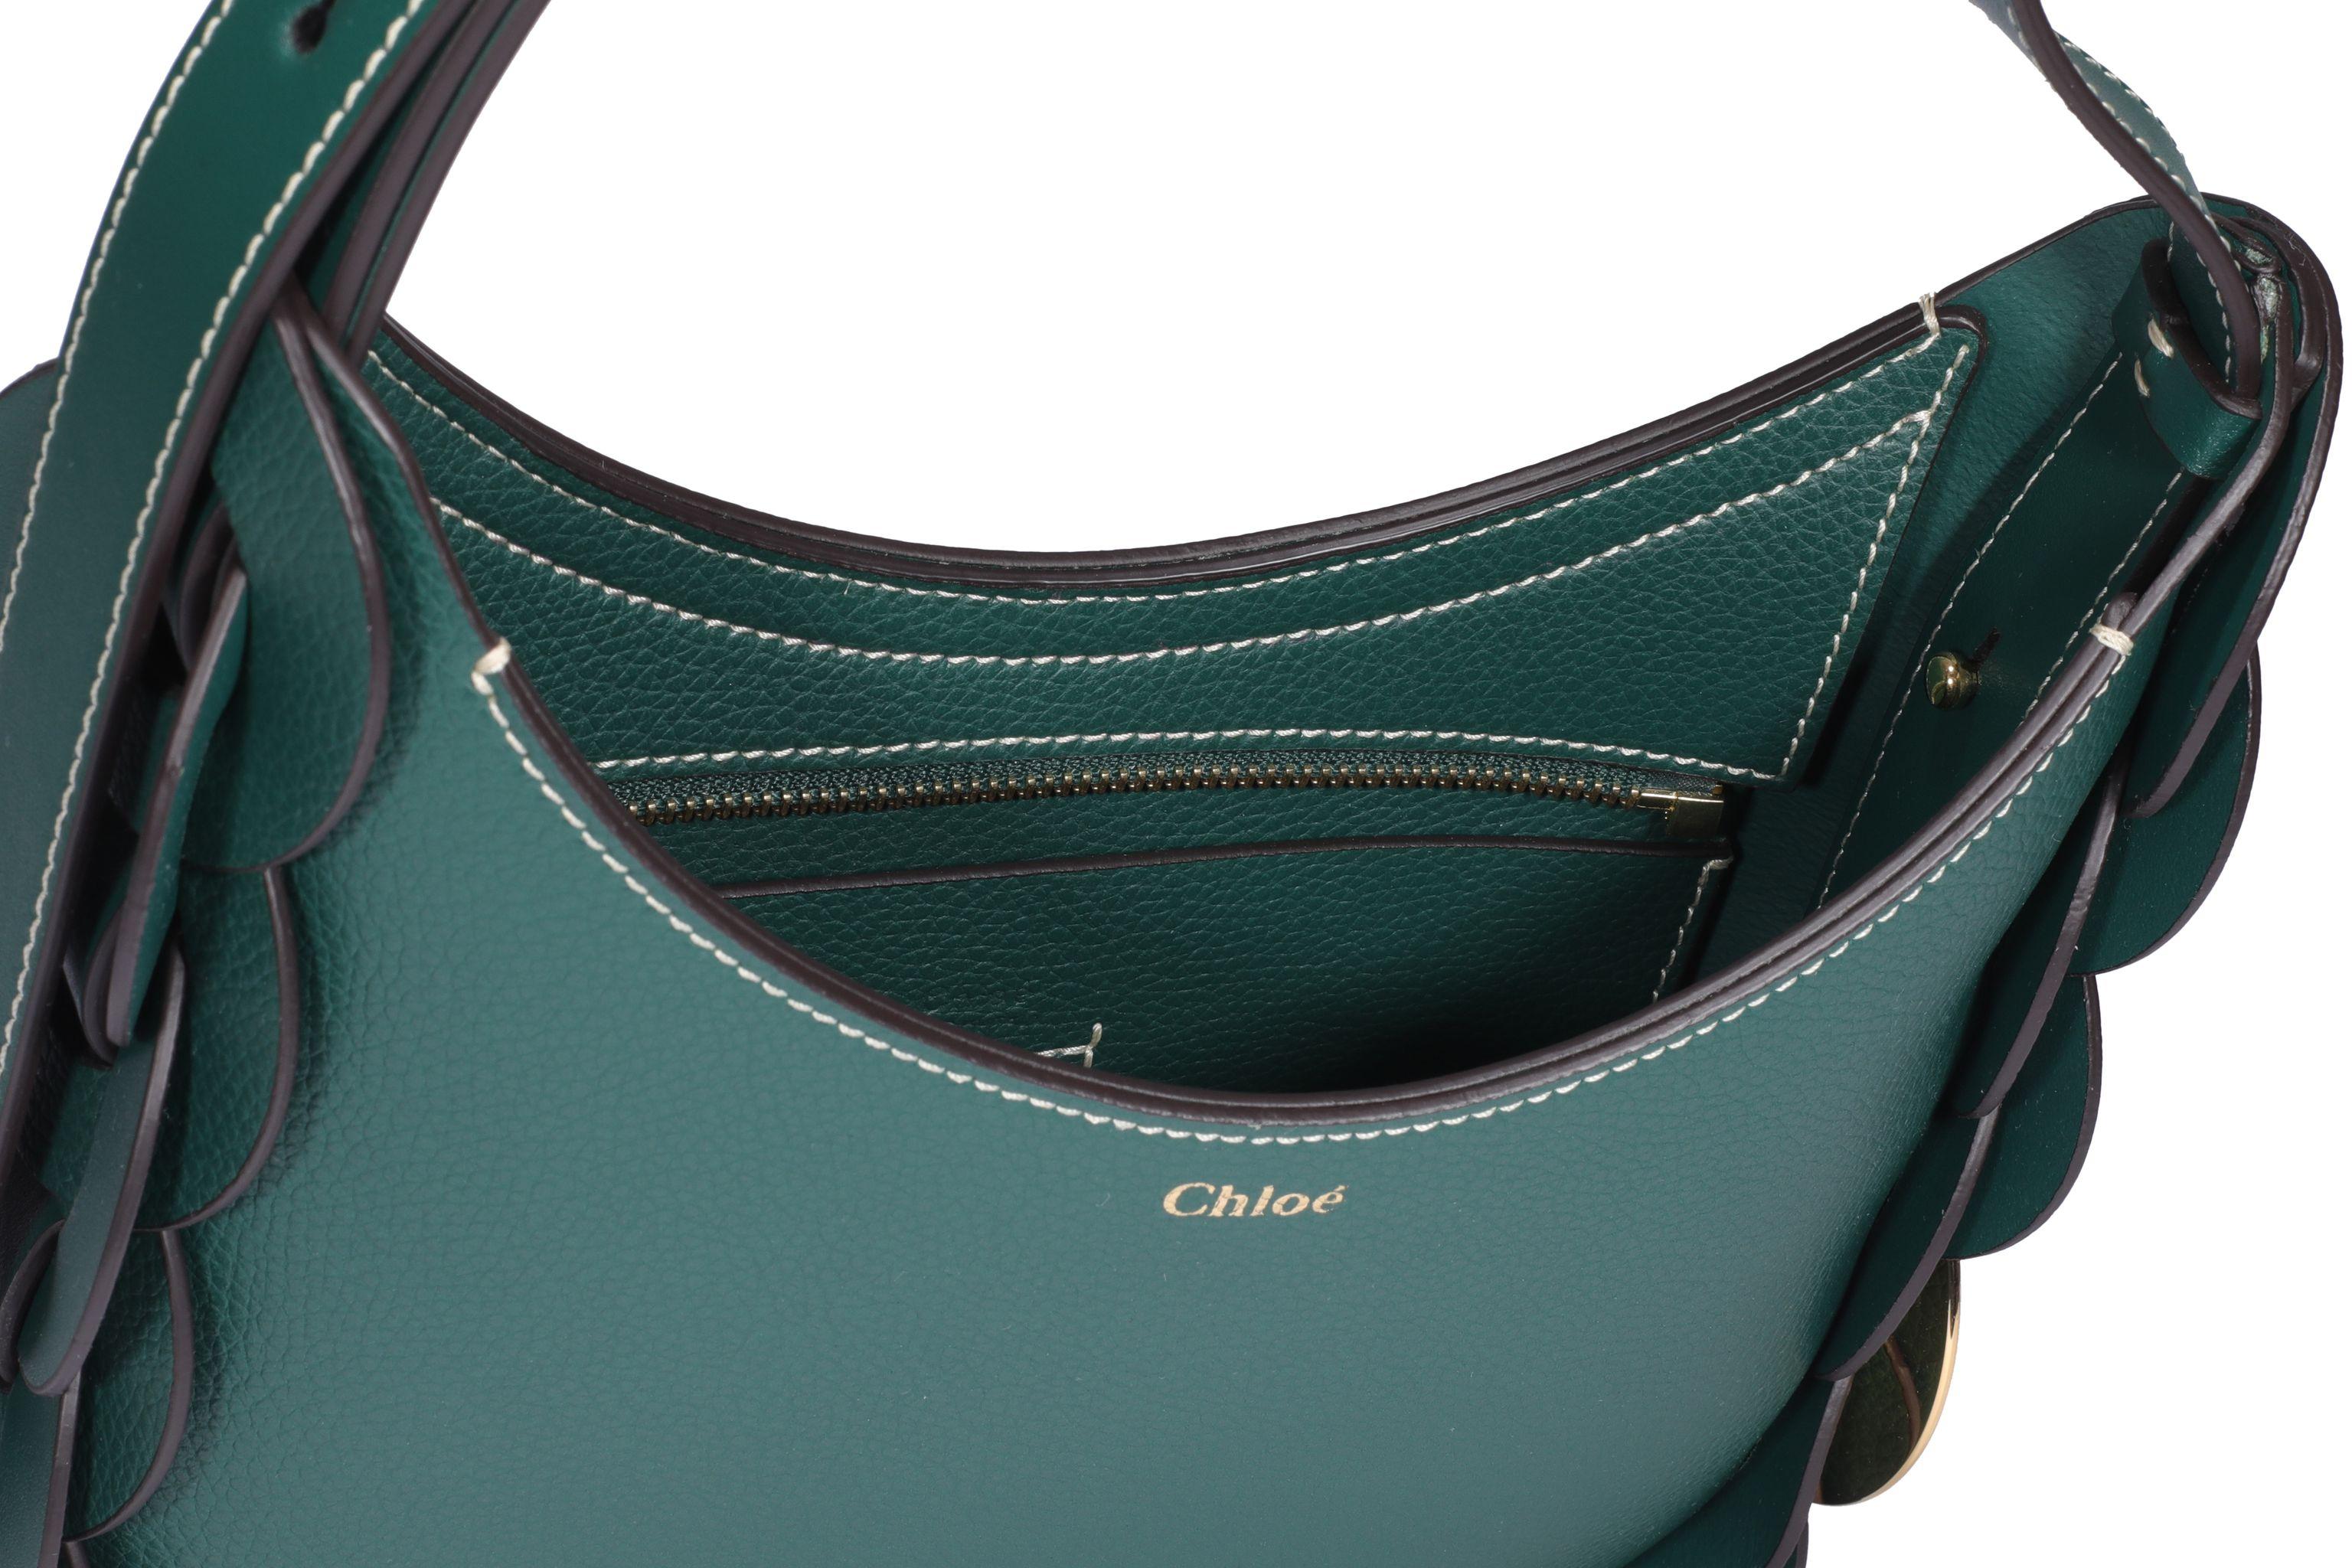 Chloé Darryl Small Hobo Bag Leather Rain Forest in Green | Lyst